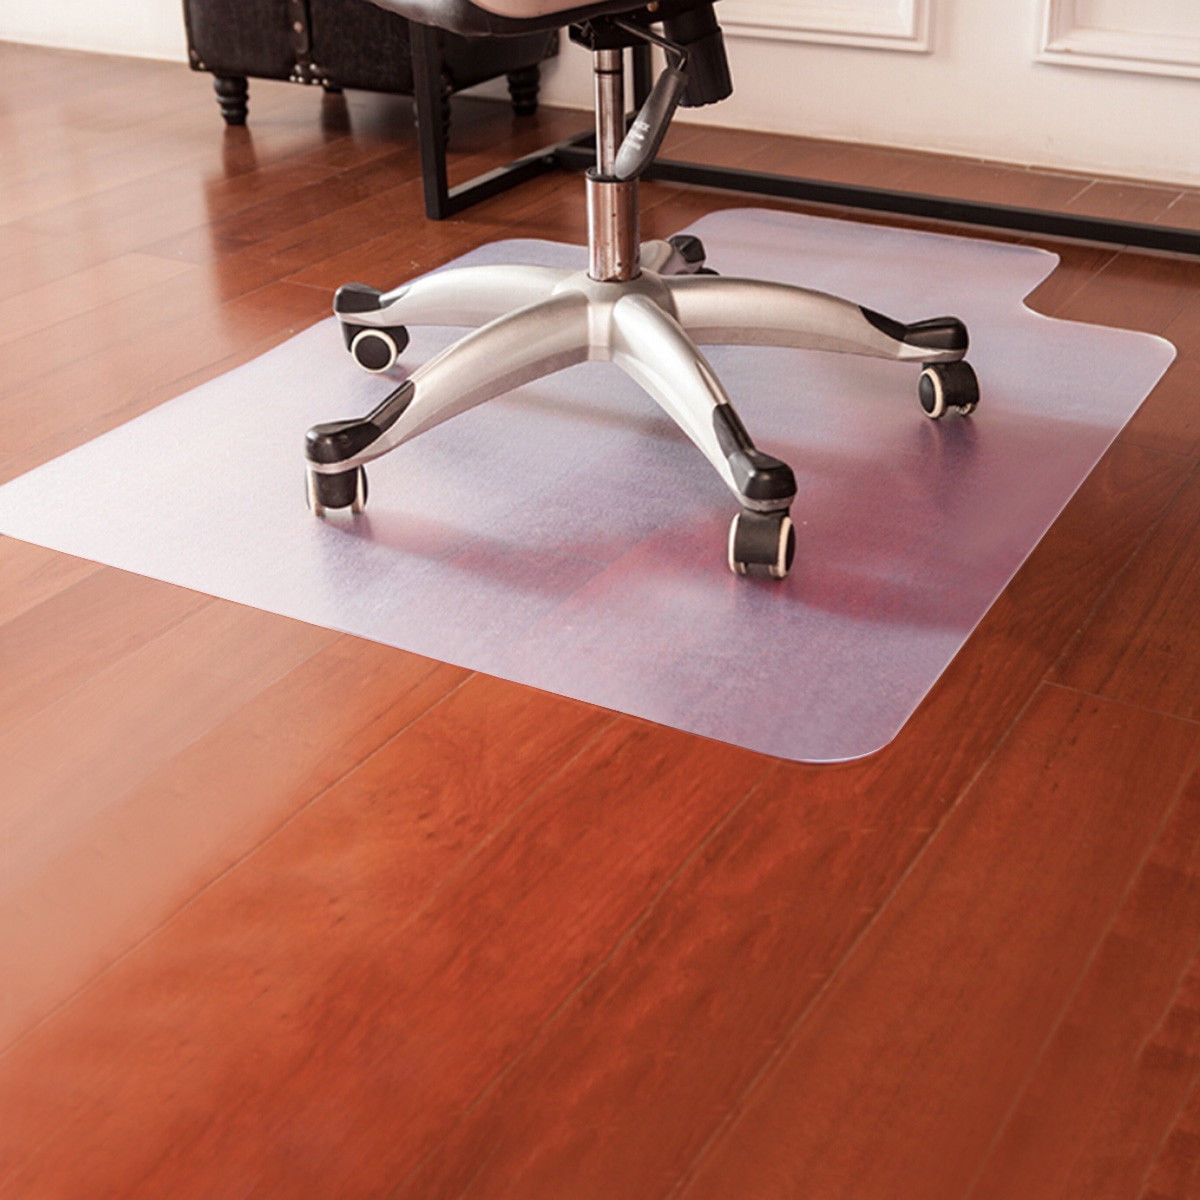 Office Chair Floor Mat For Wood Tile, Pads For Chairs On Tile Floors